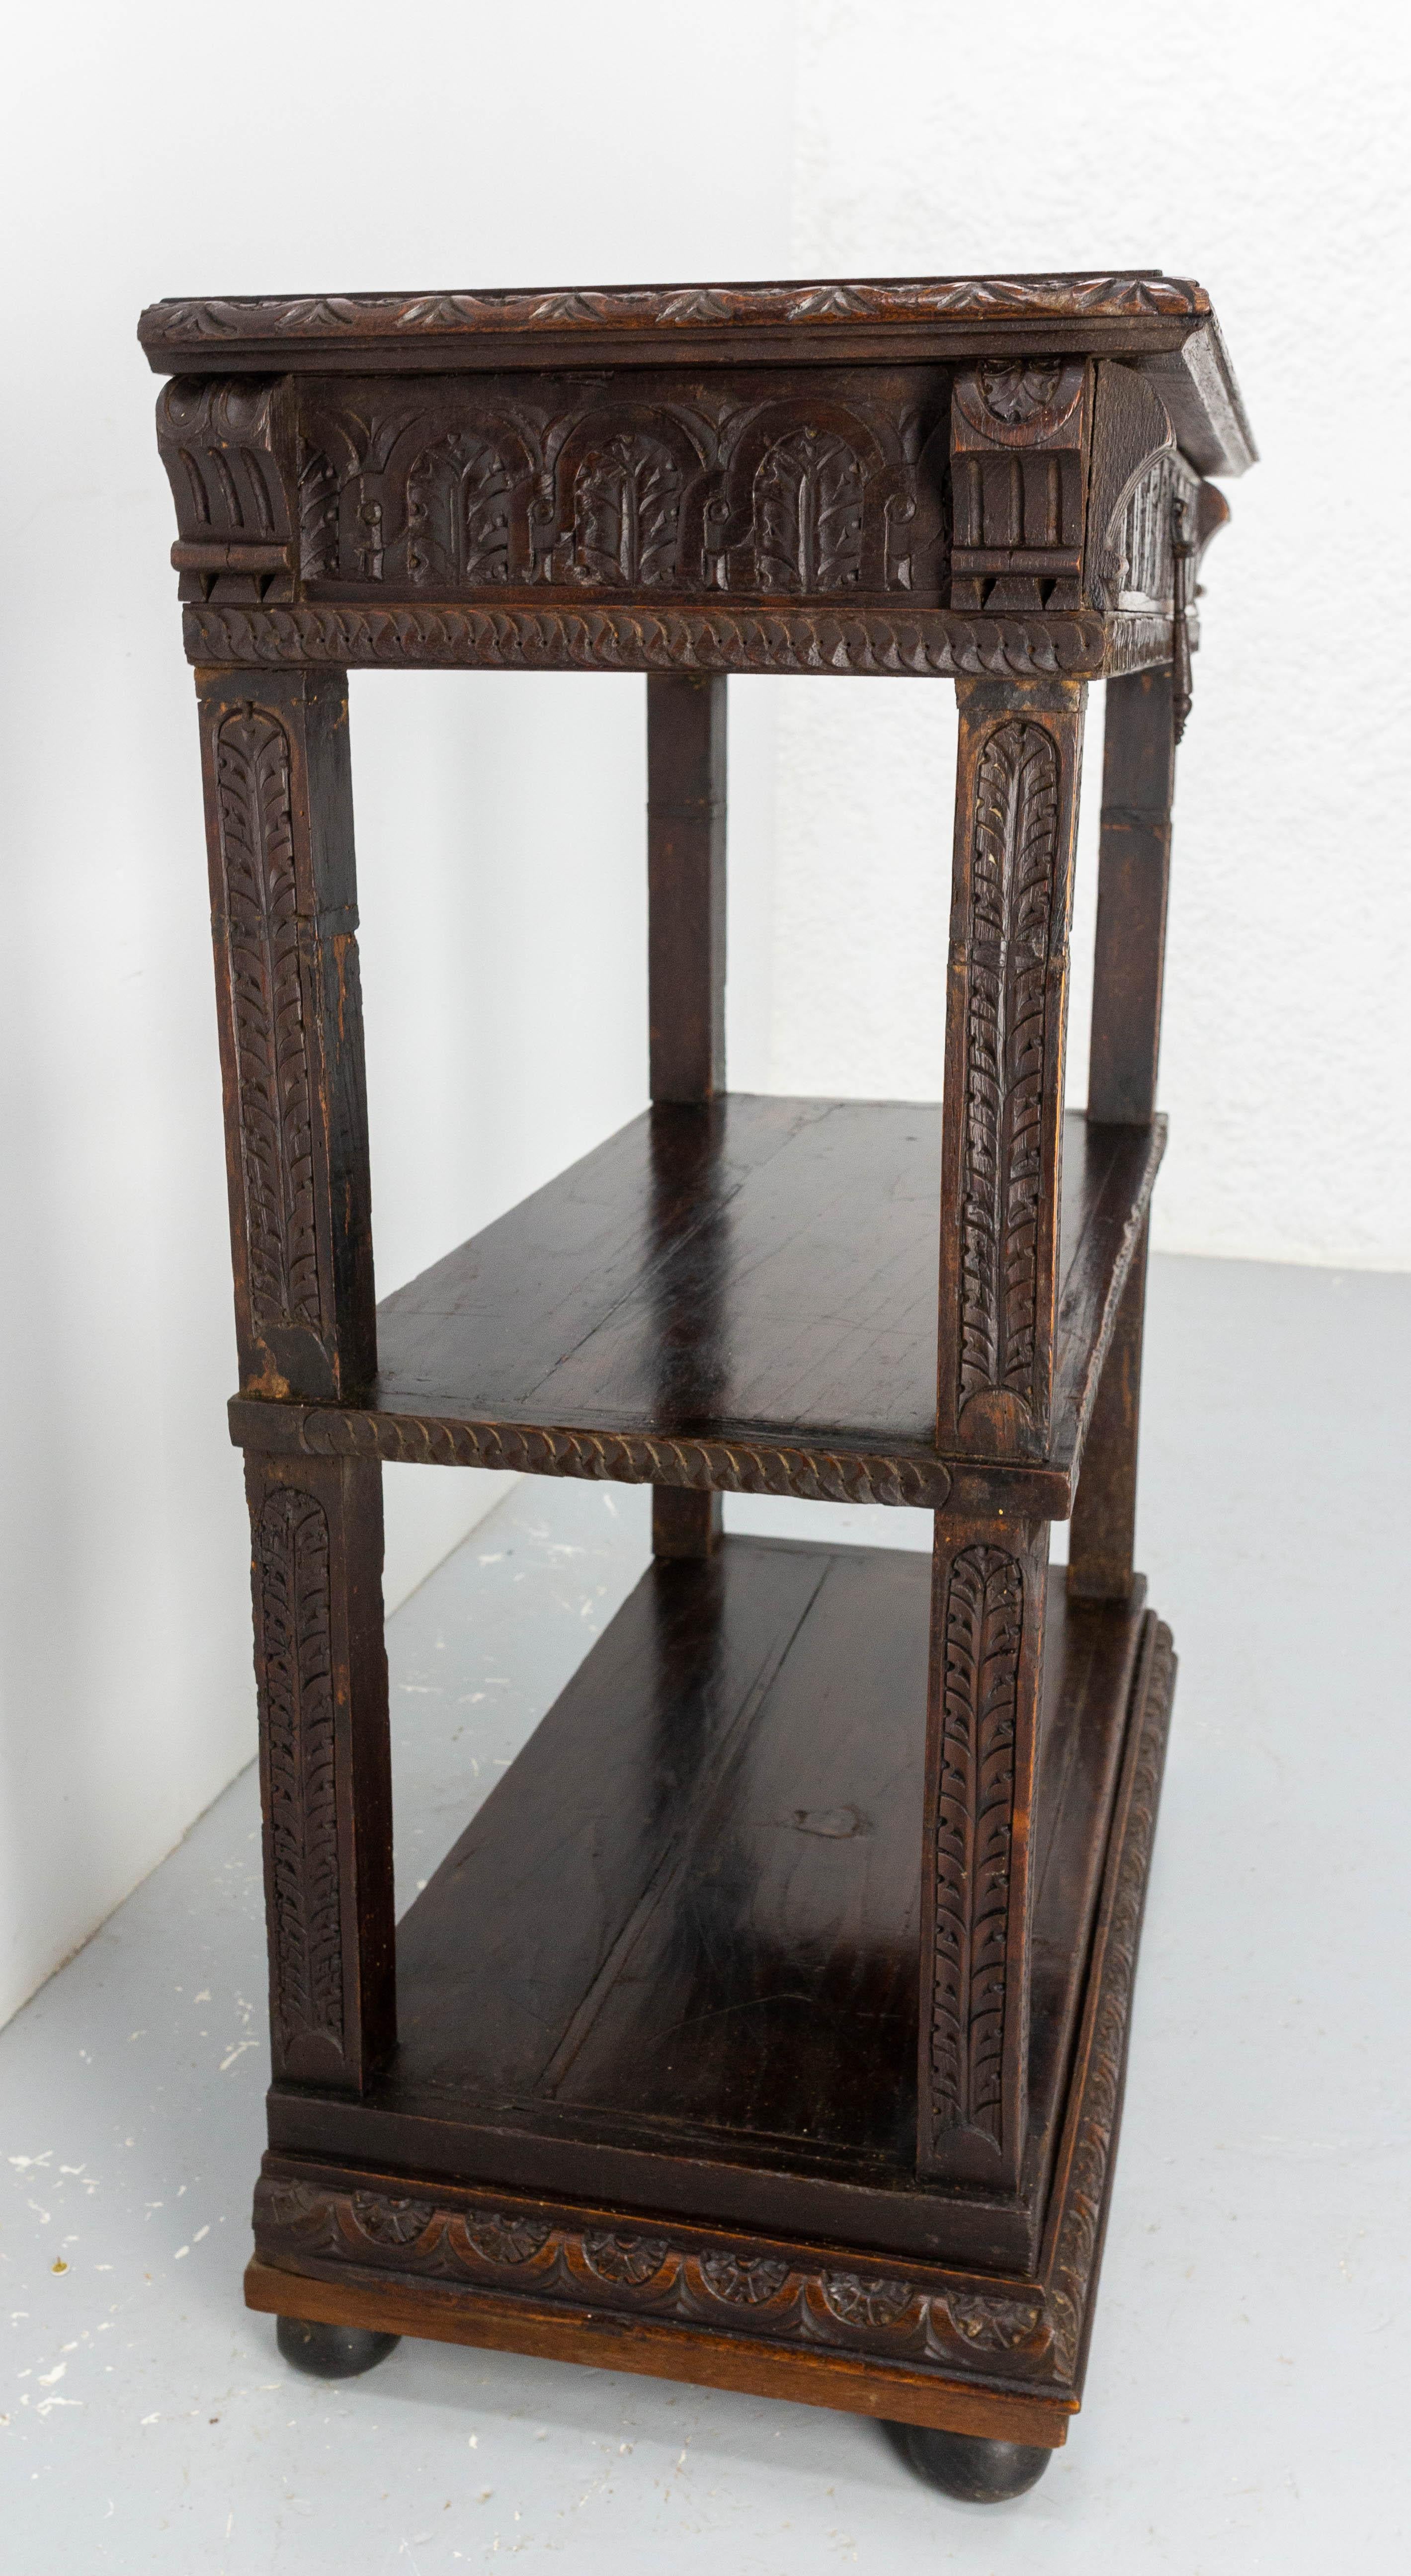 Side Table Hall or Console Oak Table Spanish Colonial Revival, circa 1890 For Sale 1